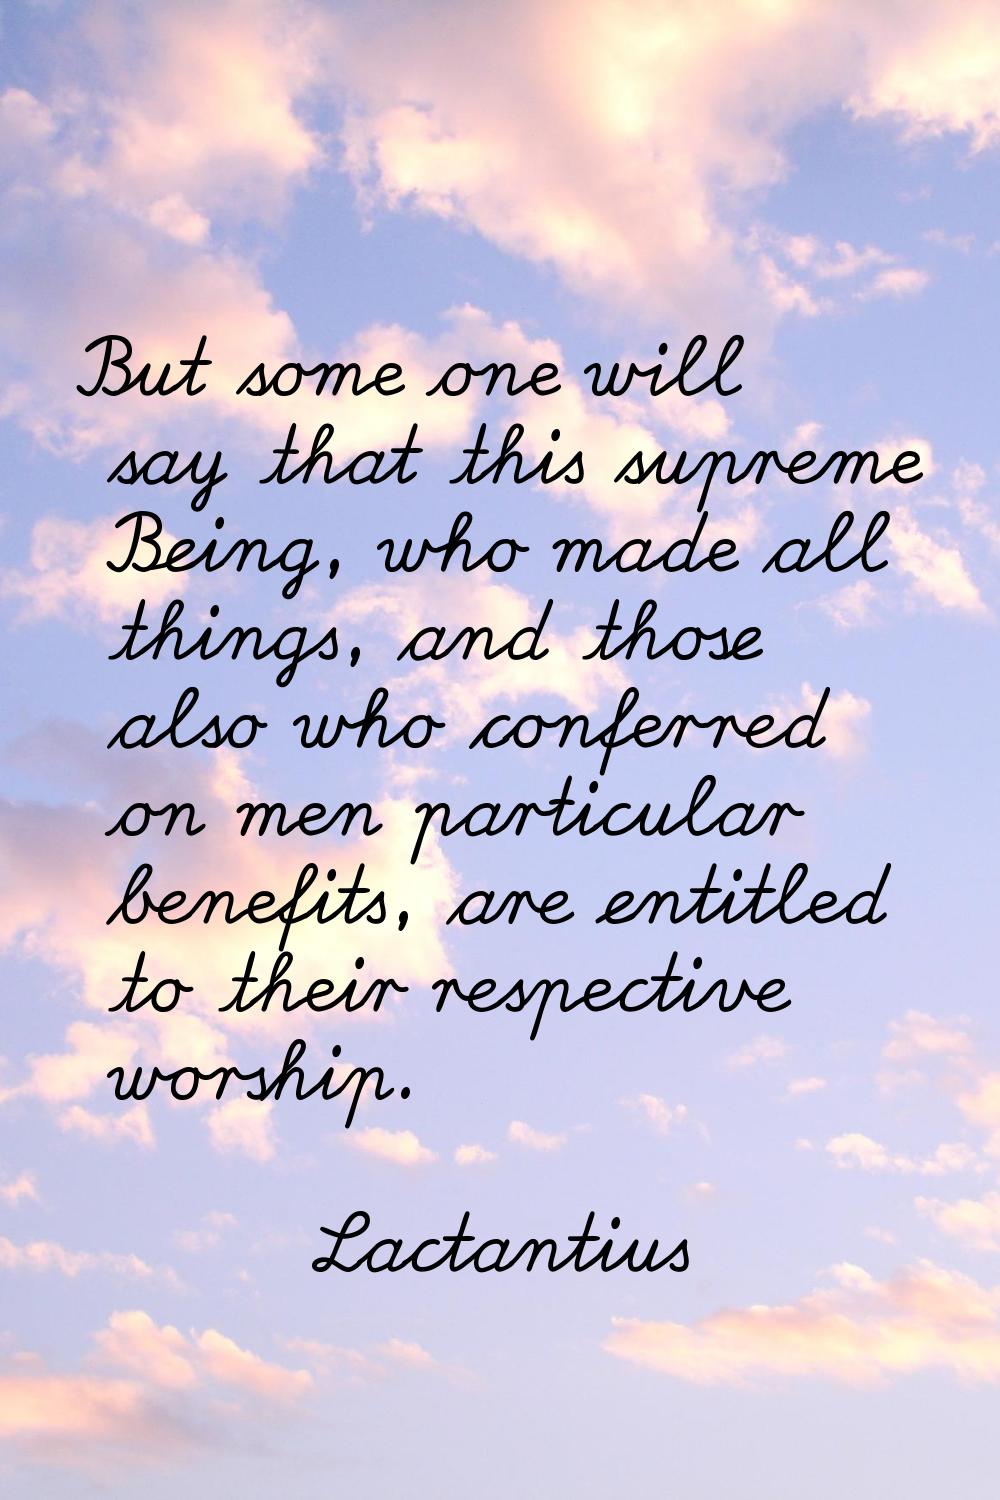 But some one will say that this supreme Being, who made all things, and those also who conferred on